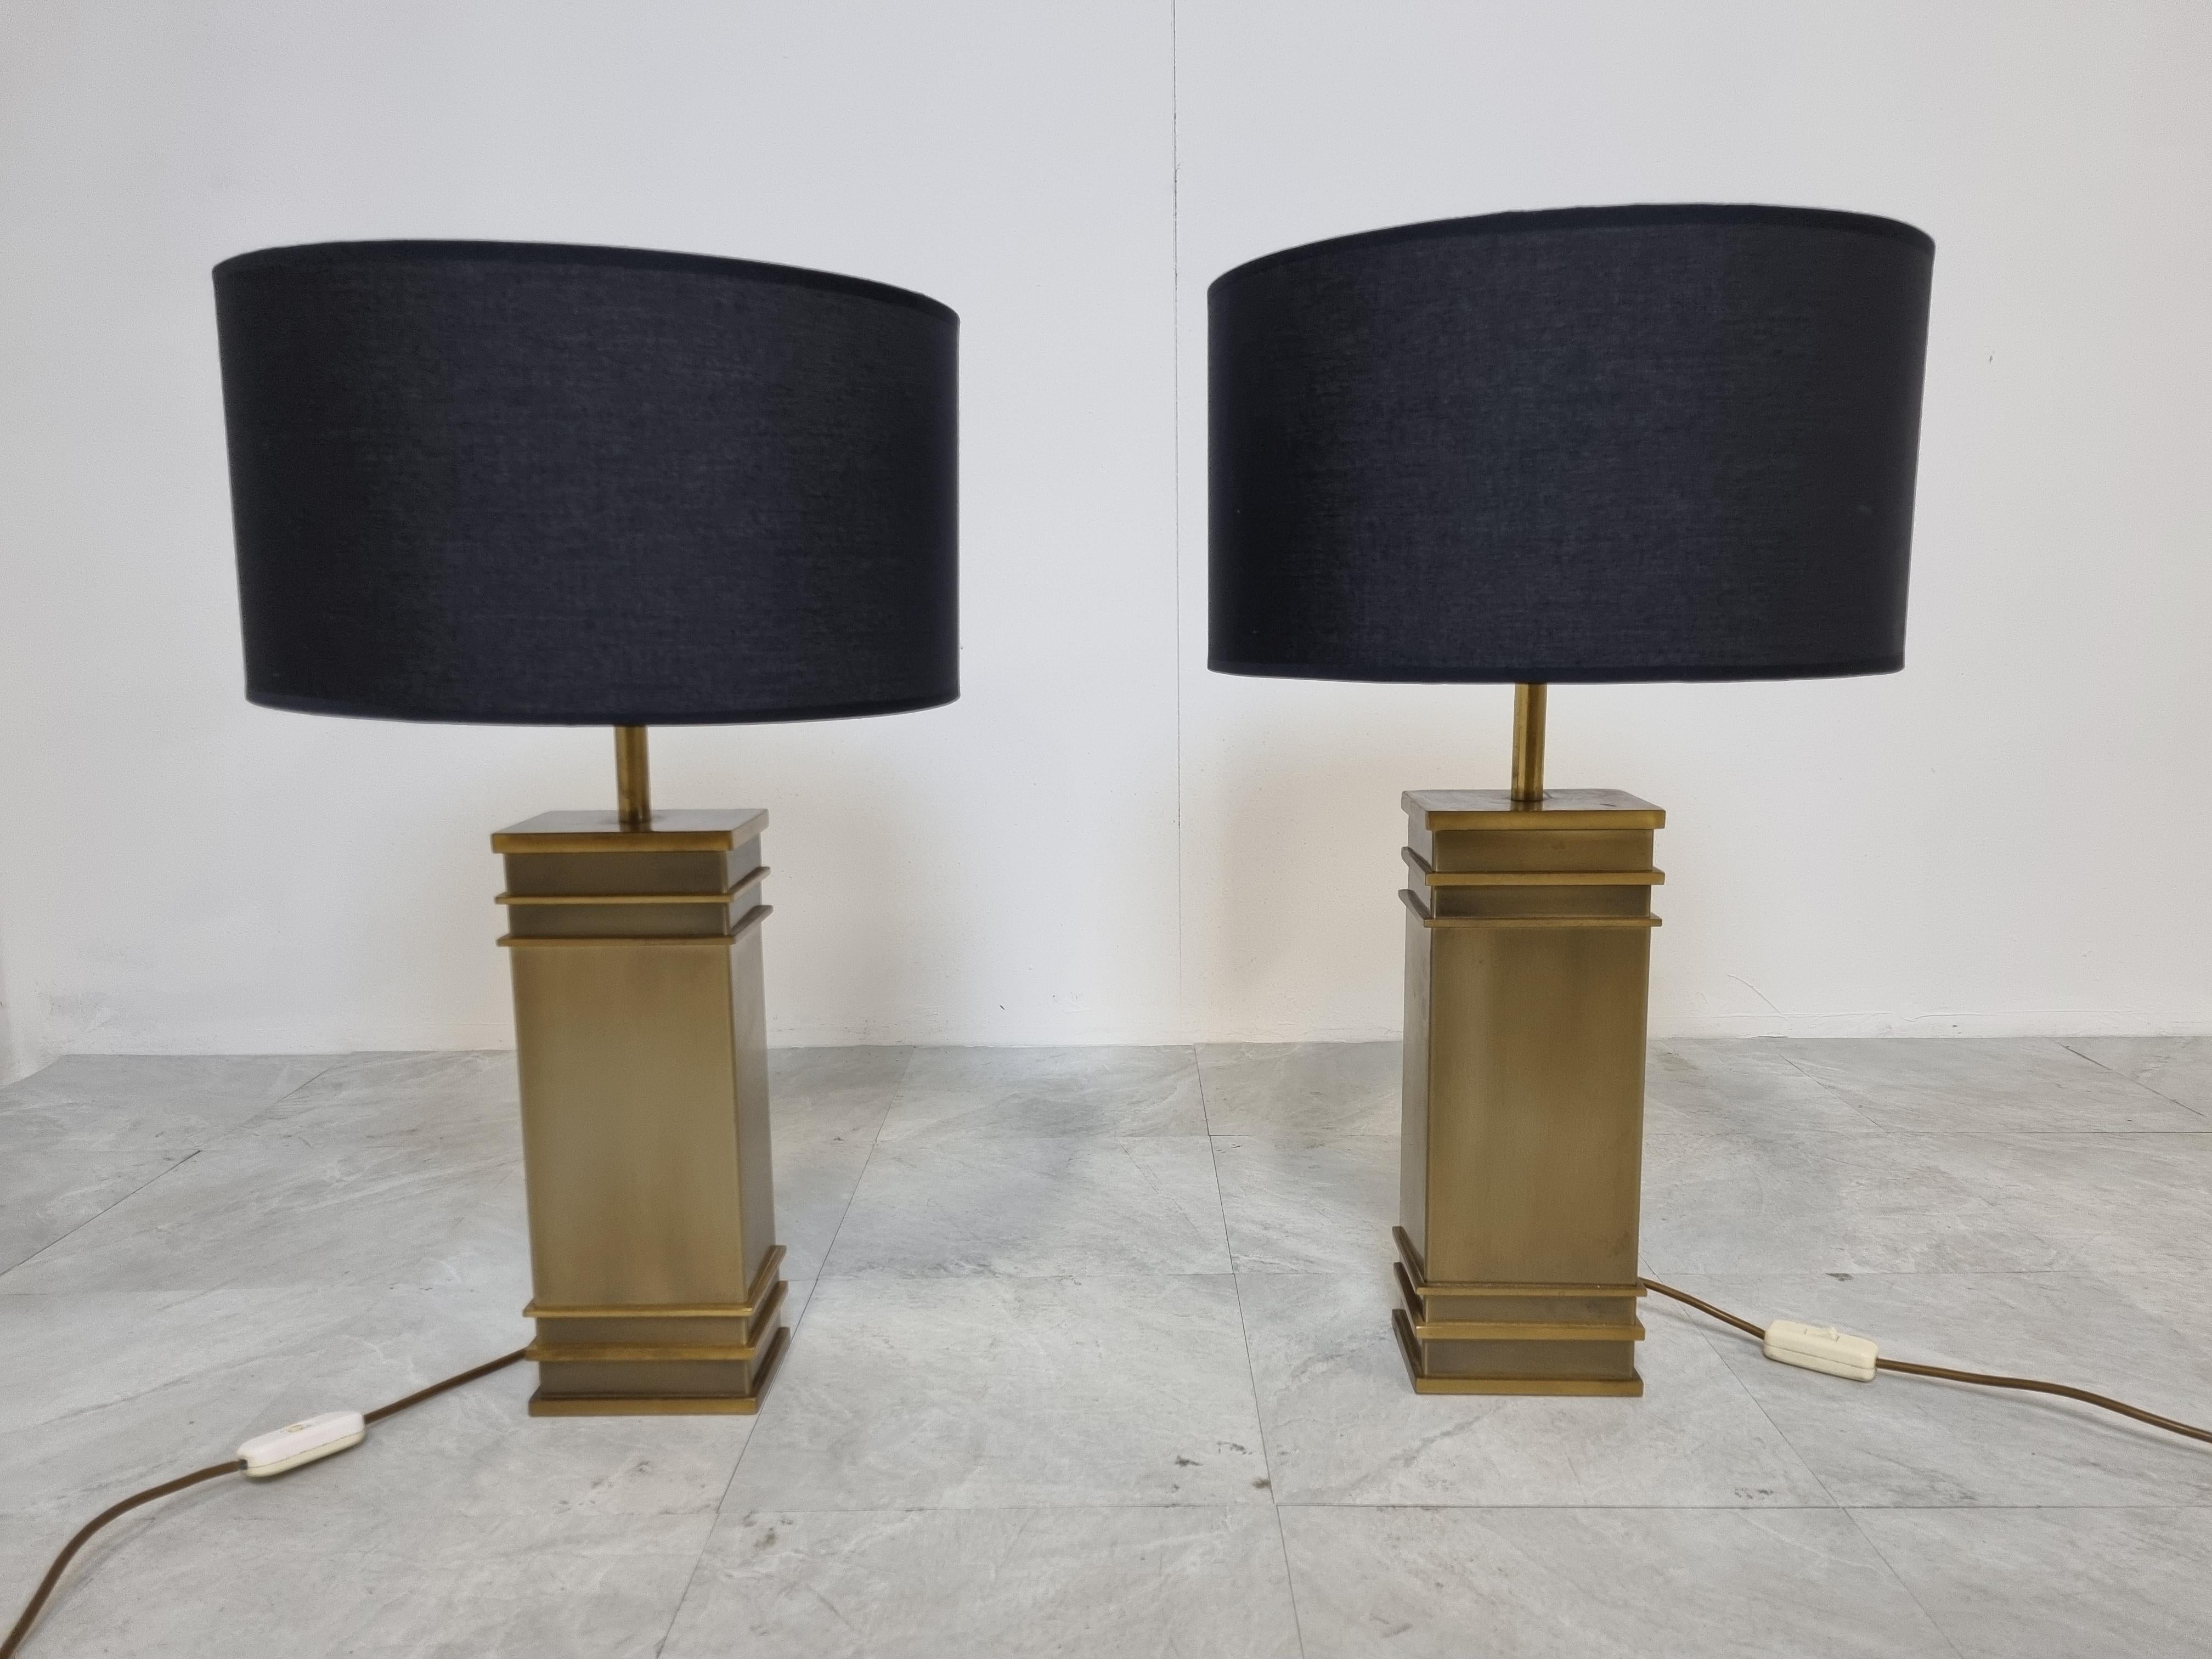 Pair of vintage brass table lamps by Belgochrom.

Timeless design lamps.

Good condition, tested and ready for use with a regular E26/E27 light bulb.

1970s - Belgium

Dimensions:
Height: 65 cm / 25.59